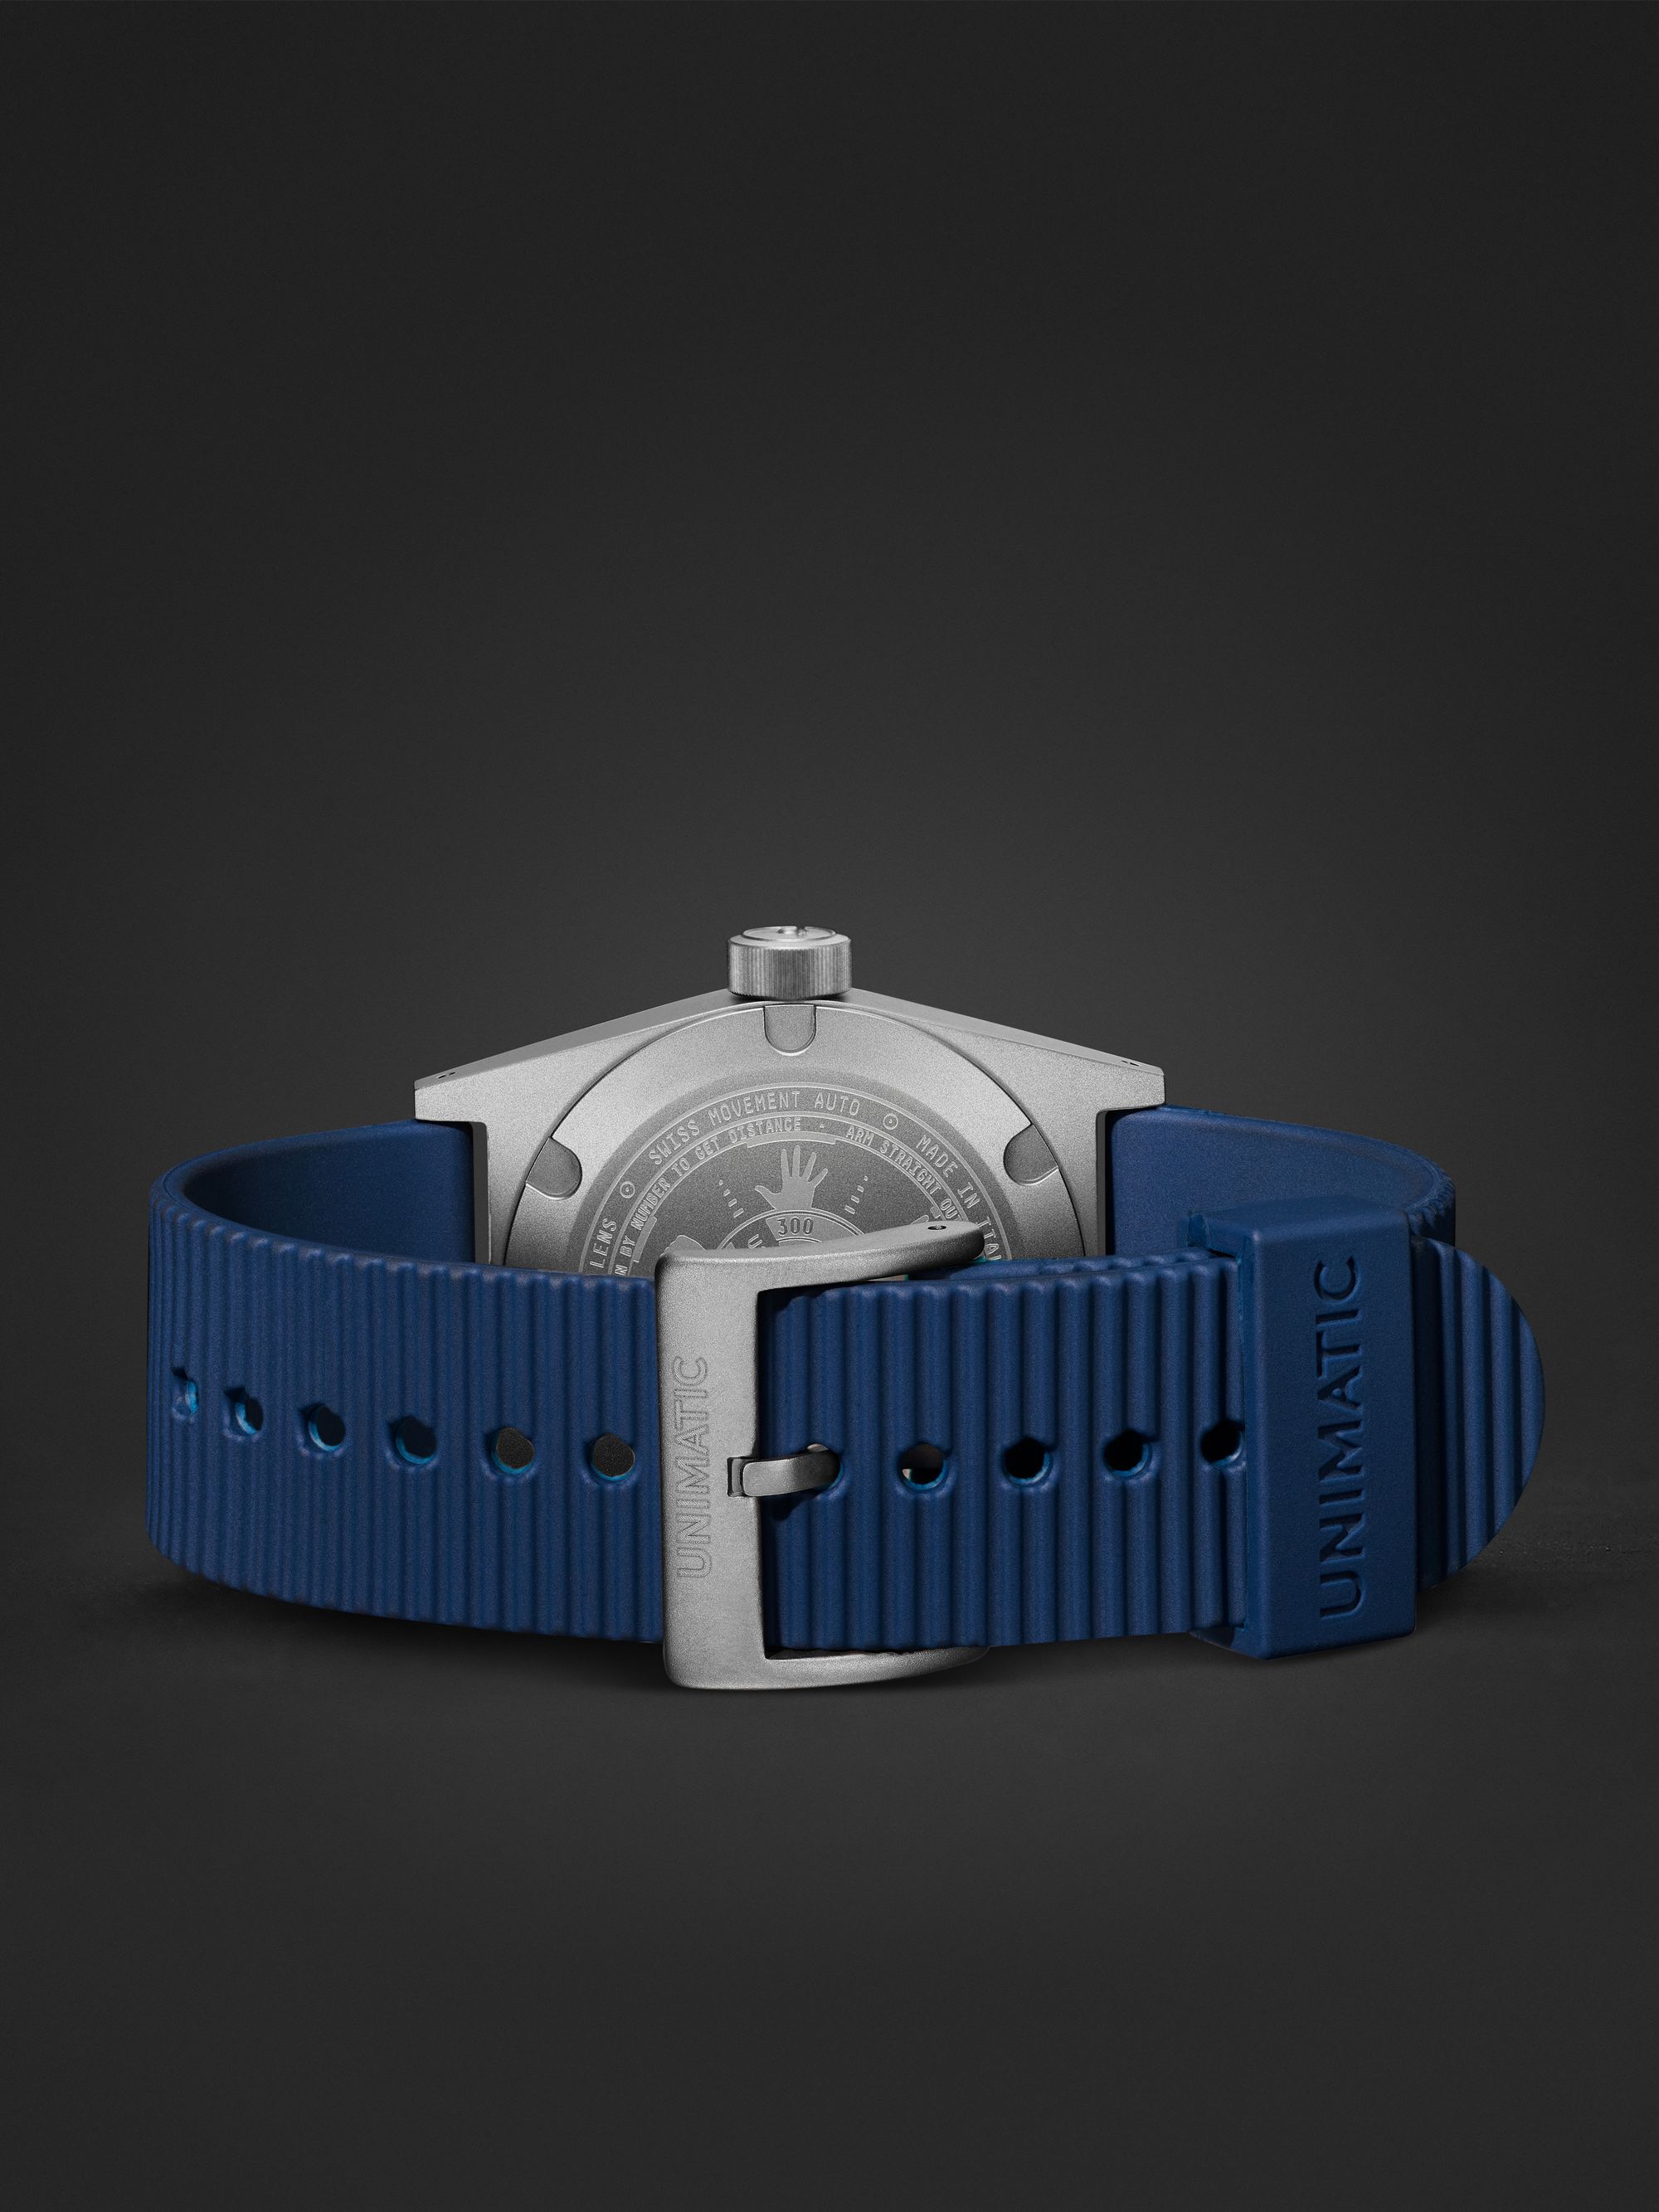 UNIMATIC Model Two Limited Edition Automatic 38mm Titanium and TPU Watch, Ref. No. U2S-T-MP